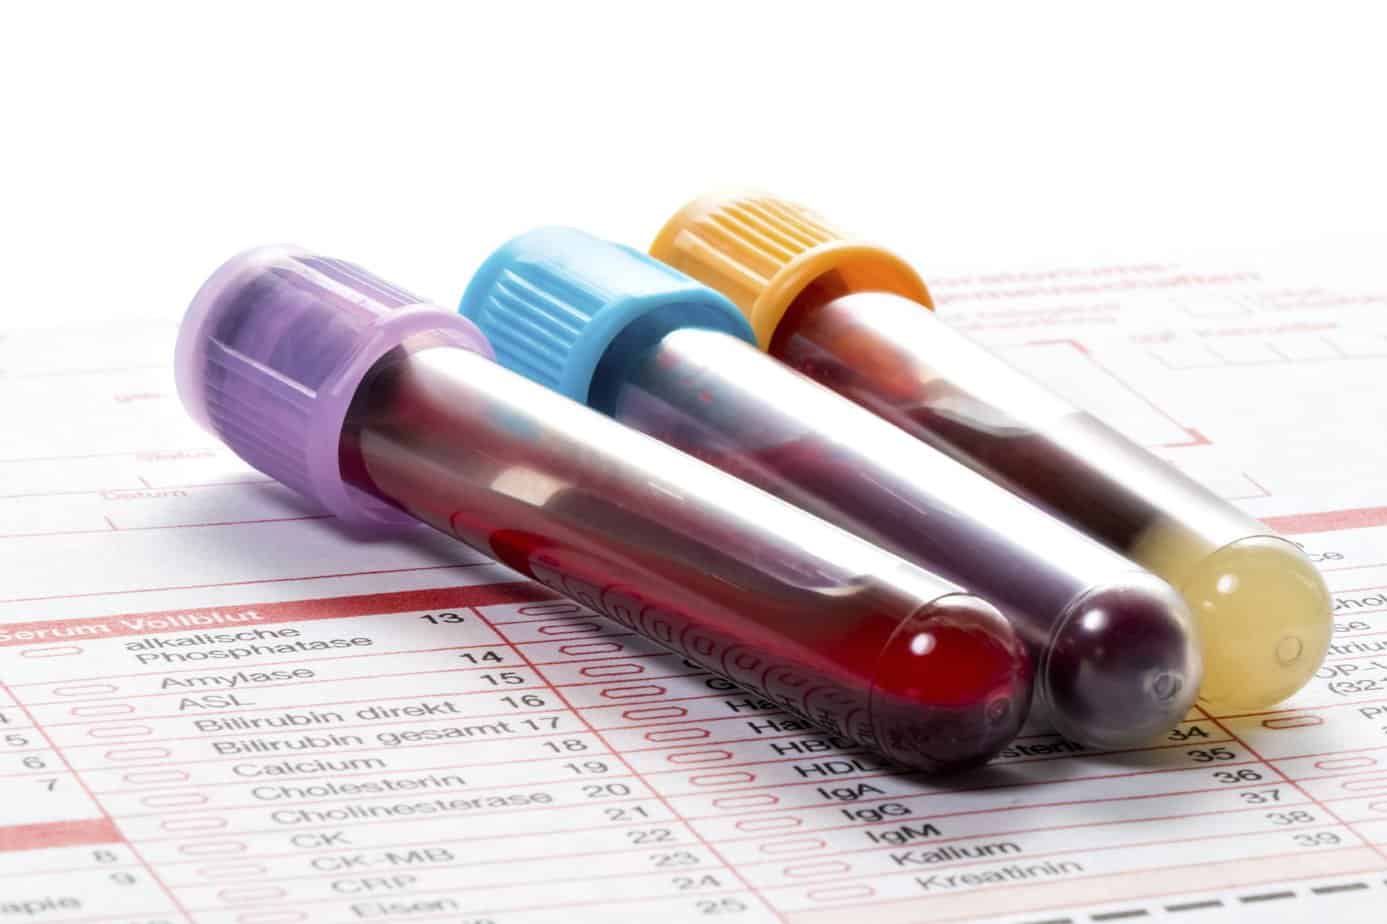 Get the blood tests you need to calculate your bioage, the age you are biologically.